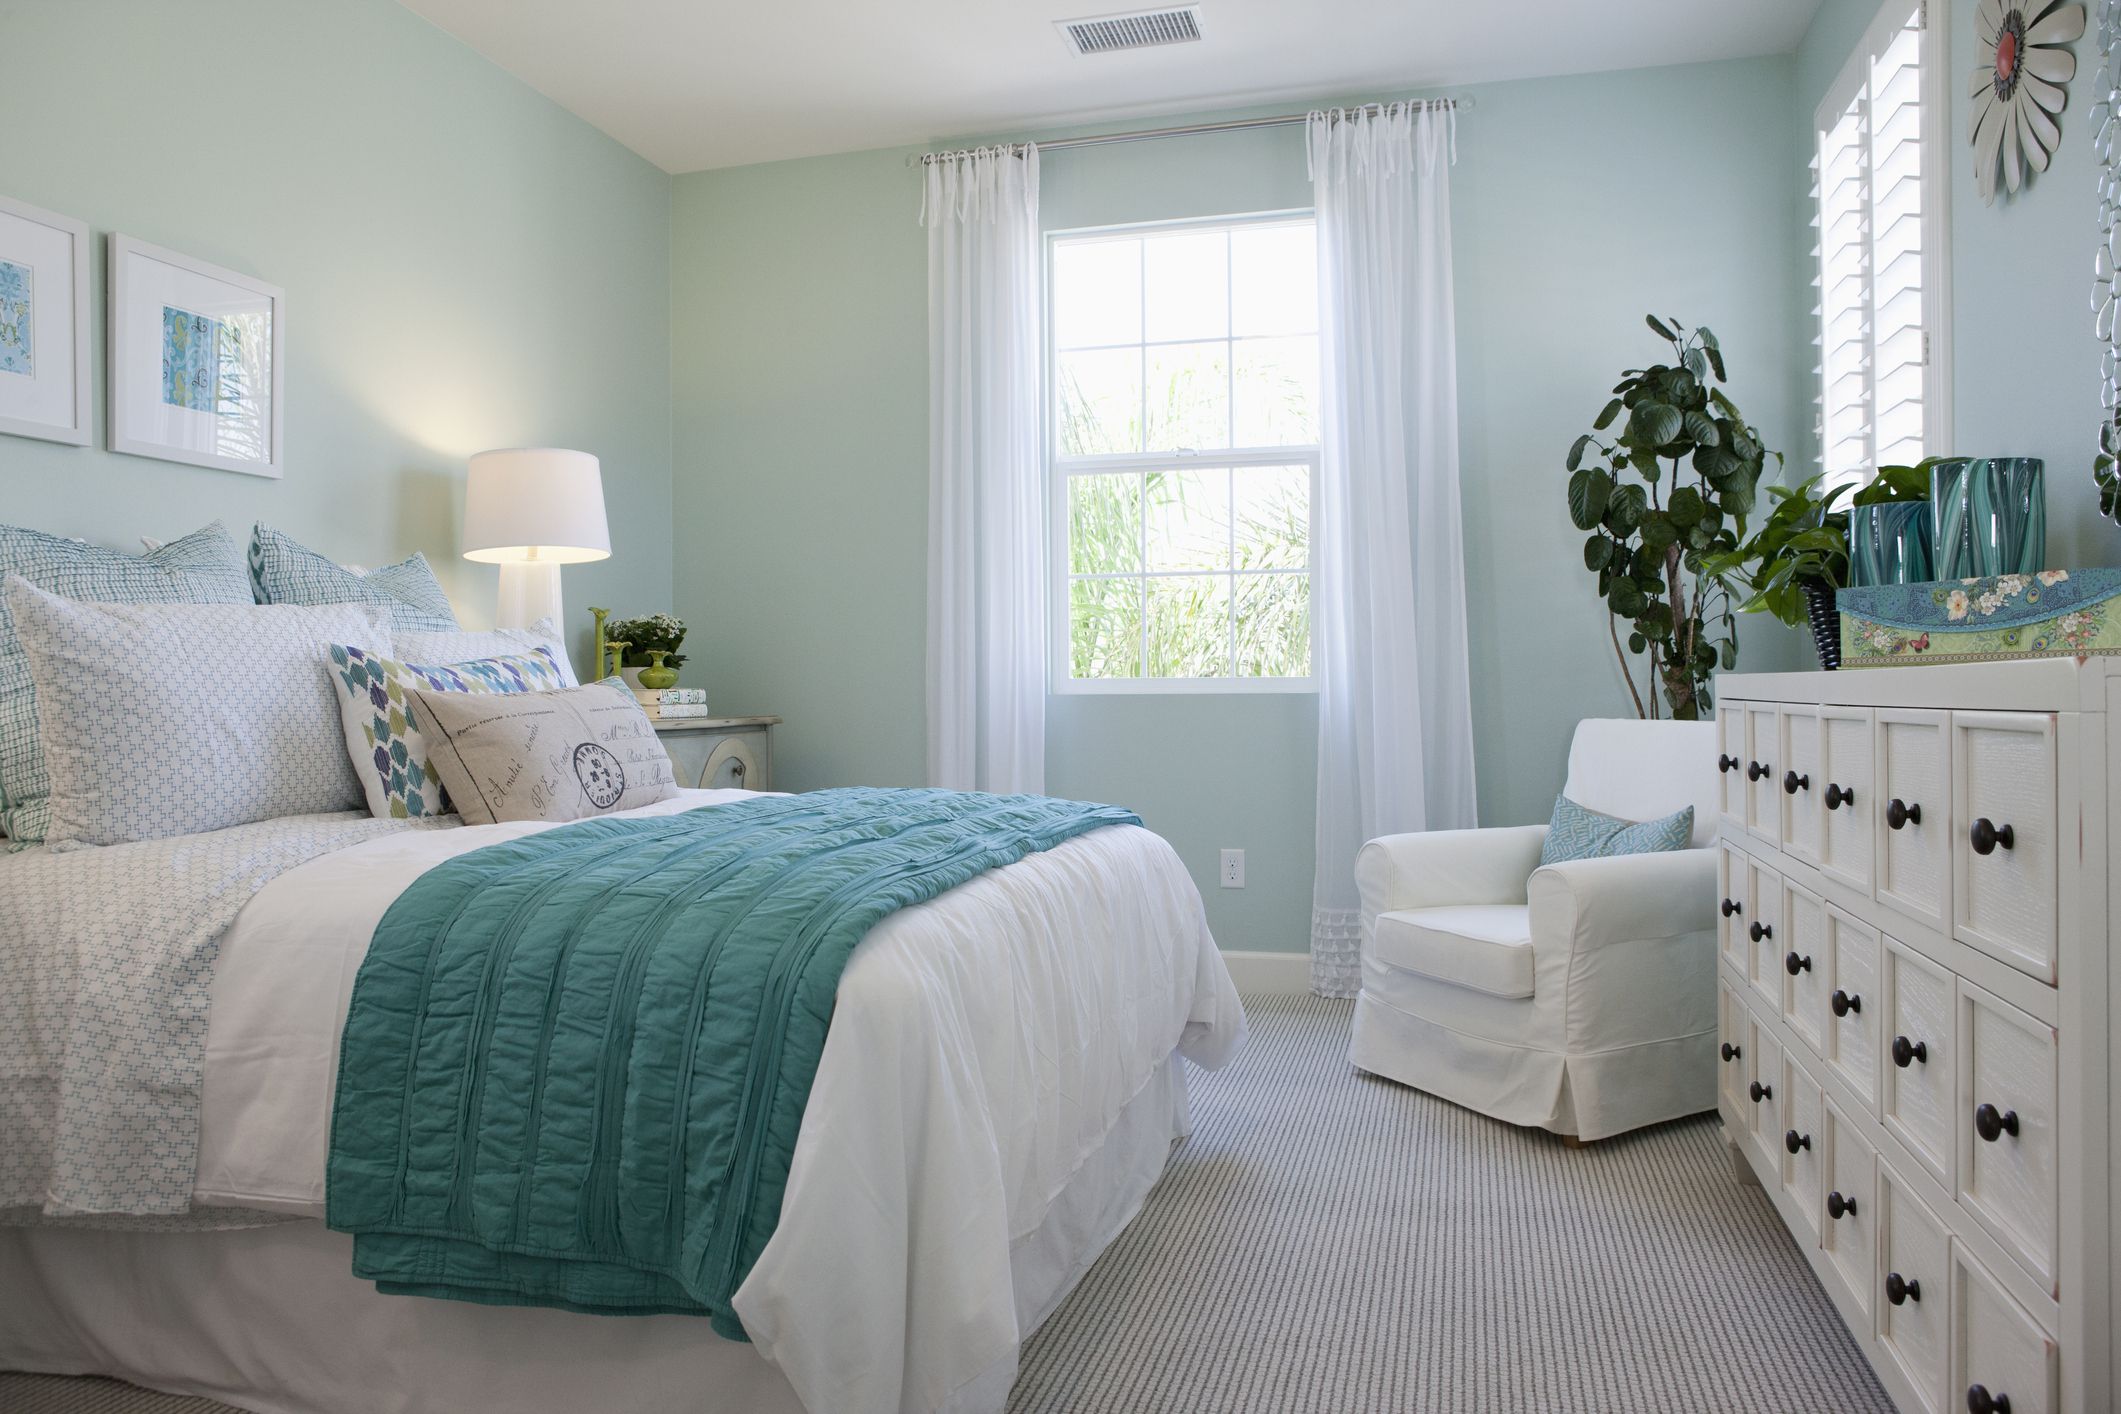 How to Choose the Right Paint Colors for Your Bedroom